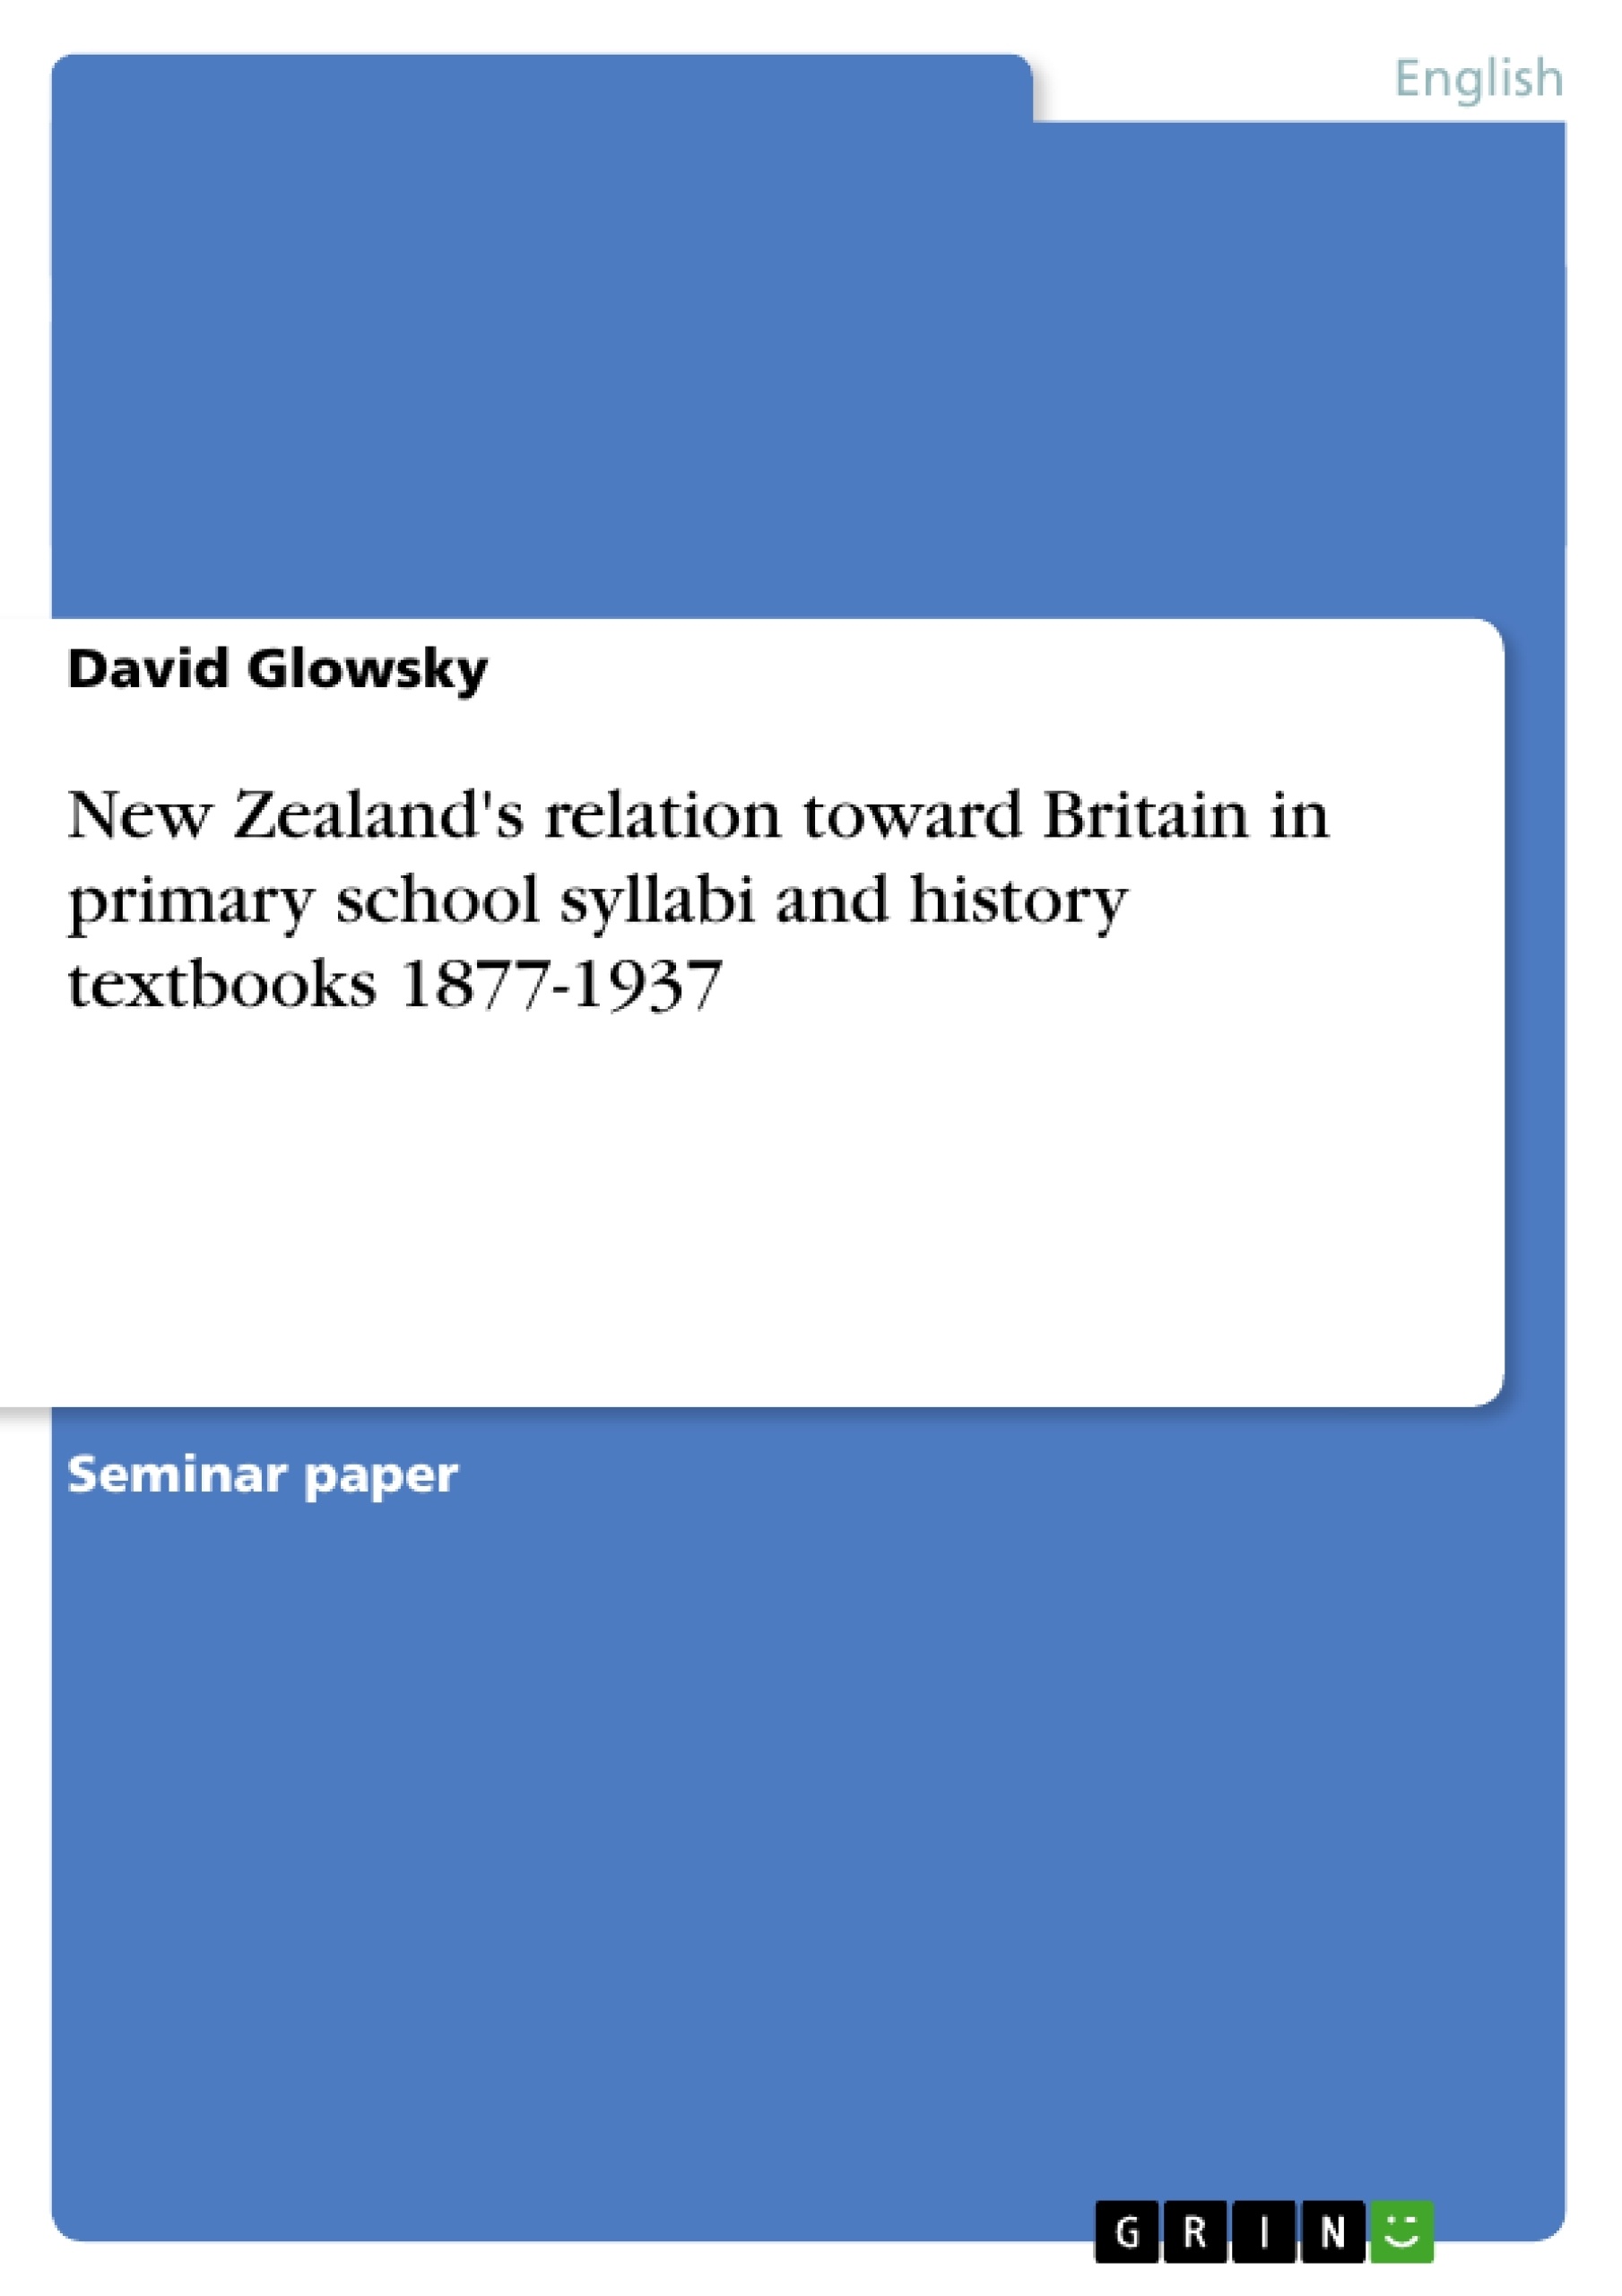 Título: New Zealand's relation toward Britain in primary school syllabi and history textbooks 1877-1937